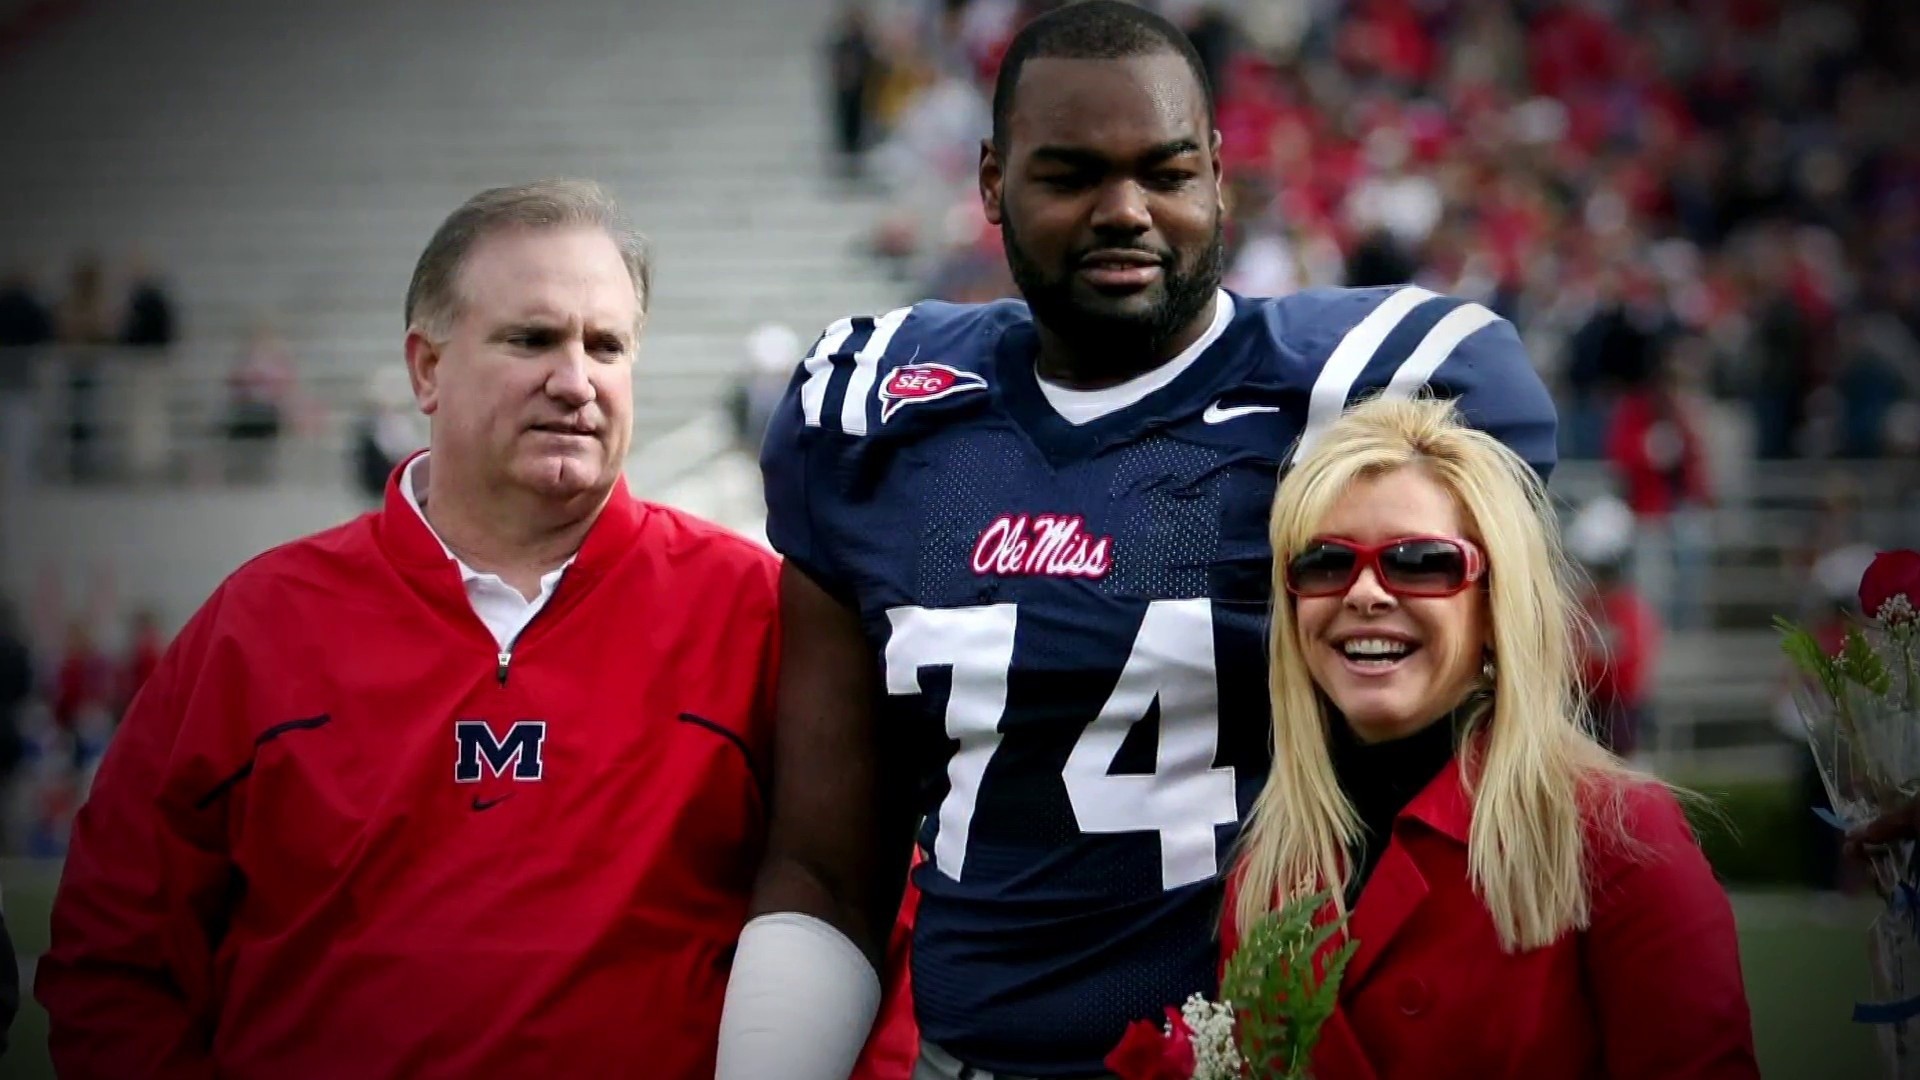 NFL star Michael Oher depicted in 'The Blind Side' says movie was